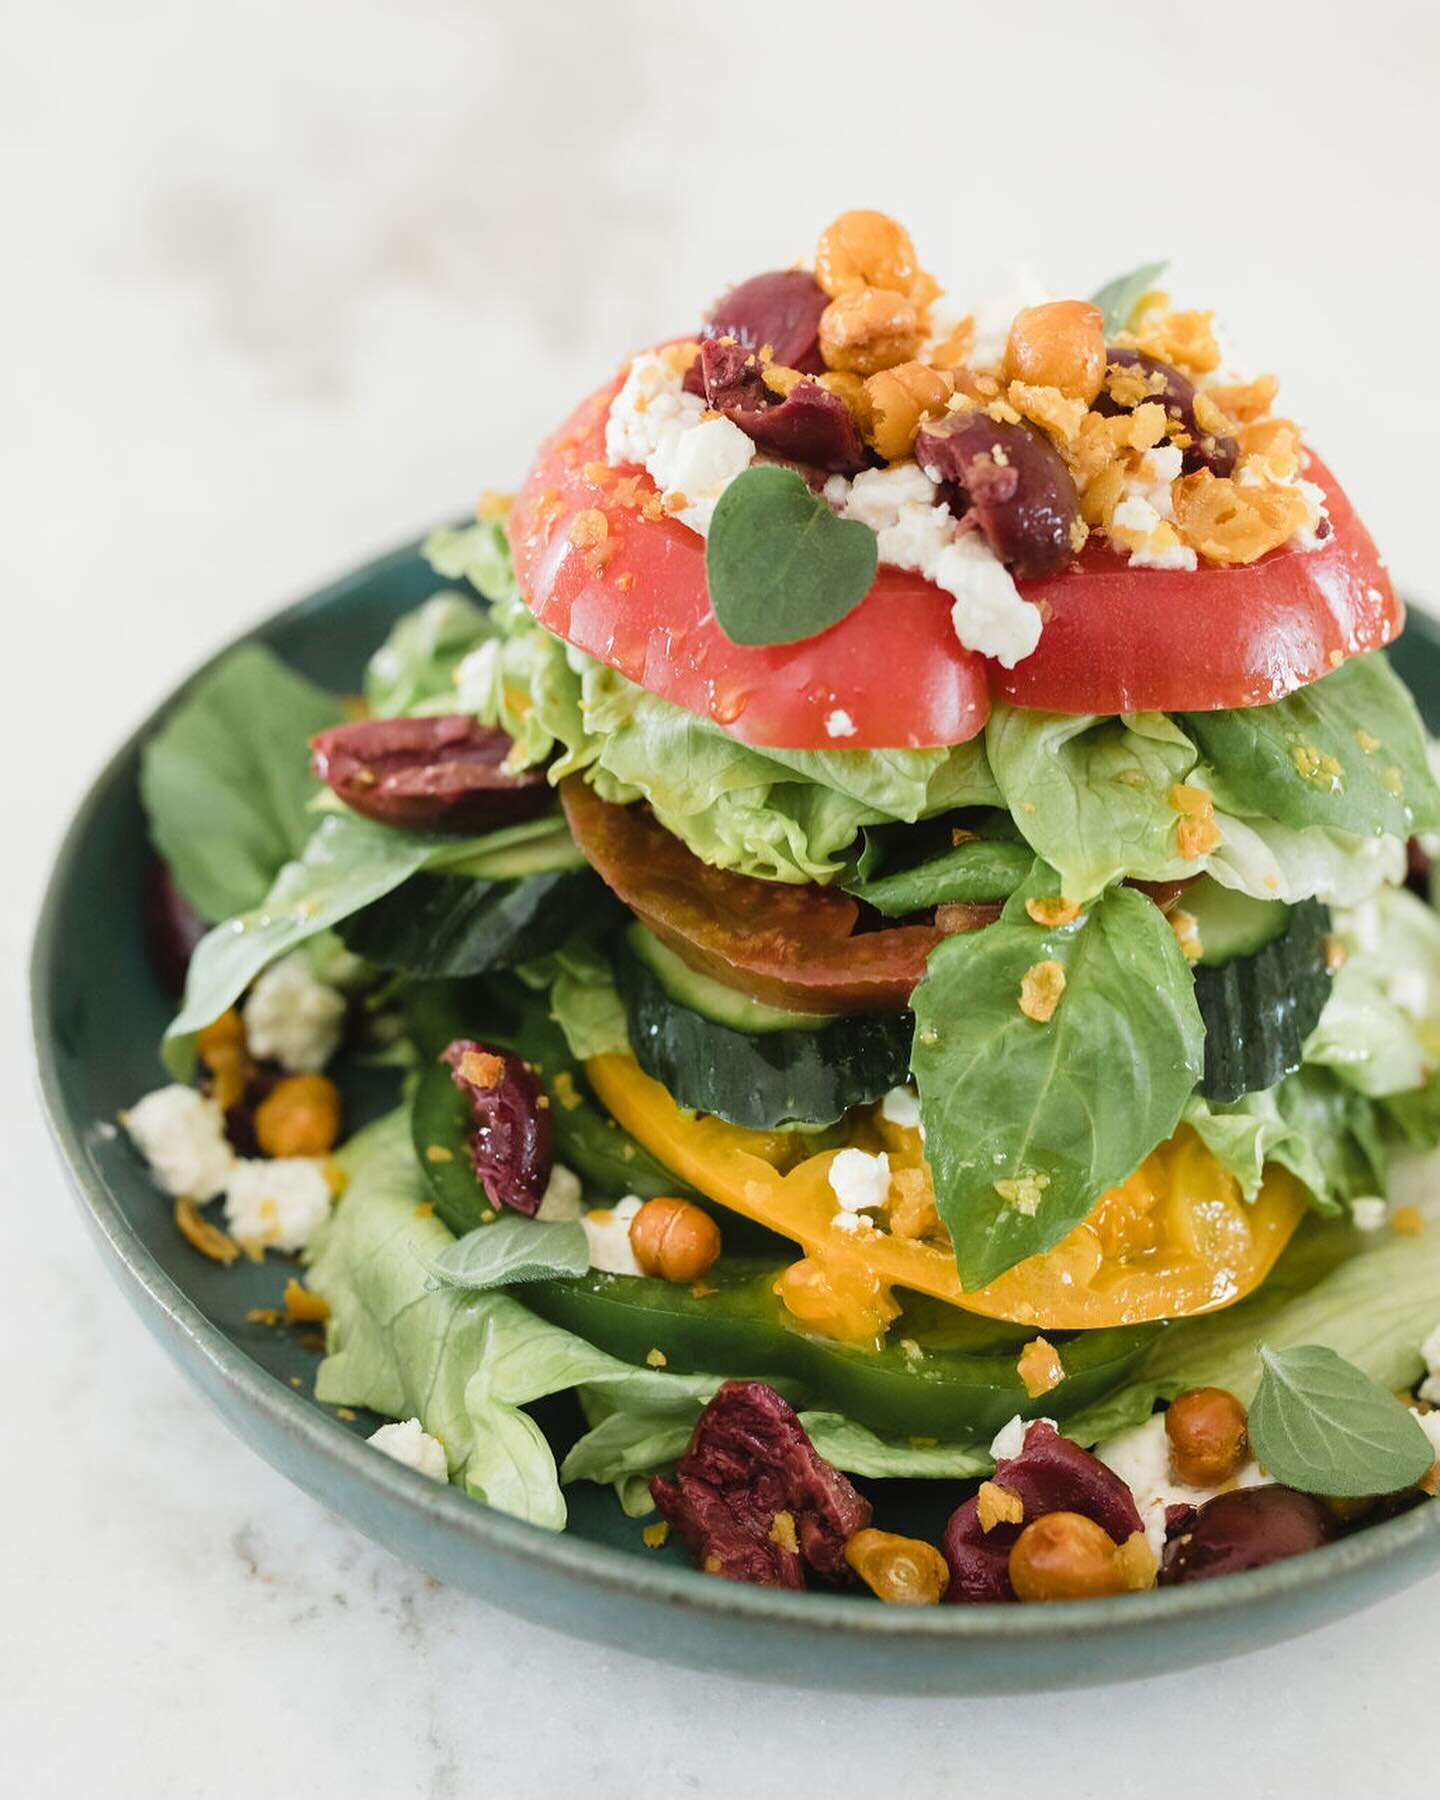 We love a creative take on a salad, like this baby iceberg stacked salad! Stack up layers of crisp baby iceberg, alternating with layers of heirloom tomatoes, bell pepper and cucumber, and top with crispy fried chickpeas, feta cheese, kalamata olives